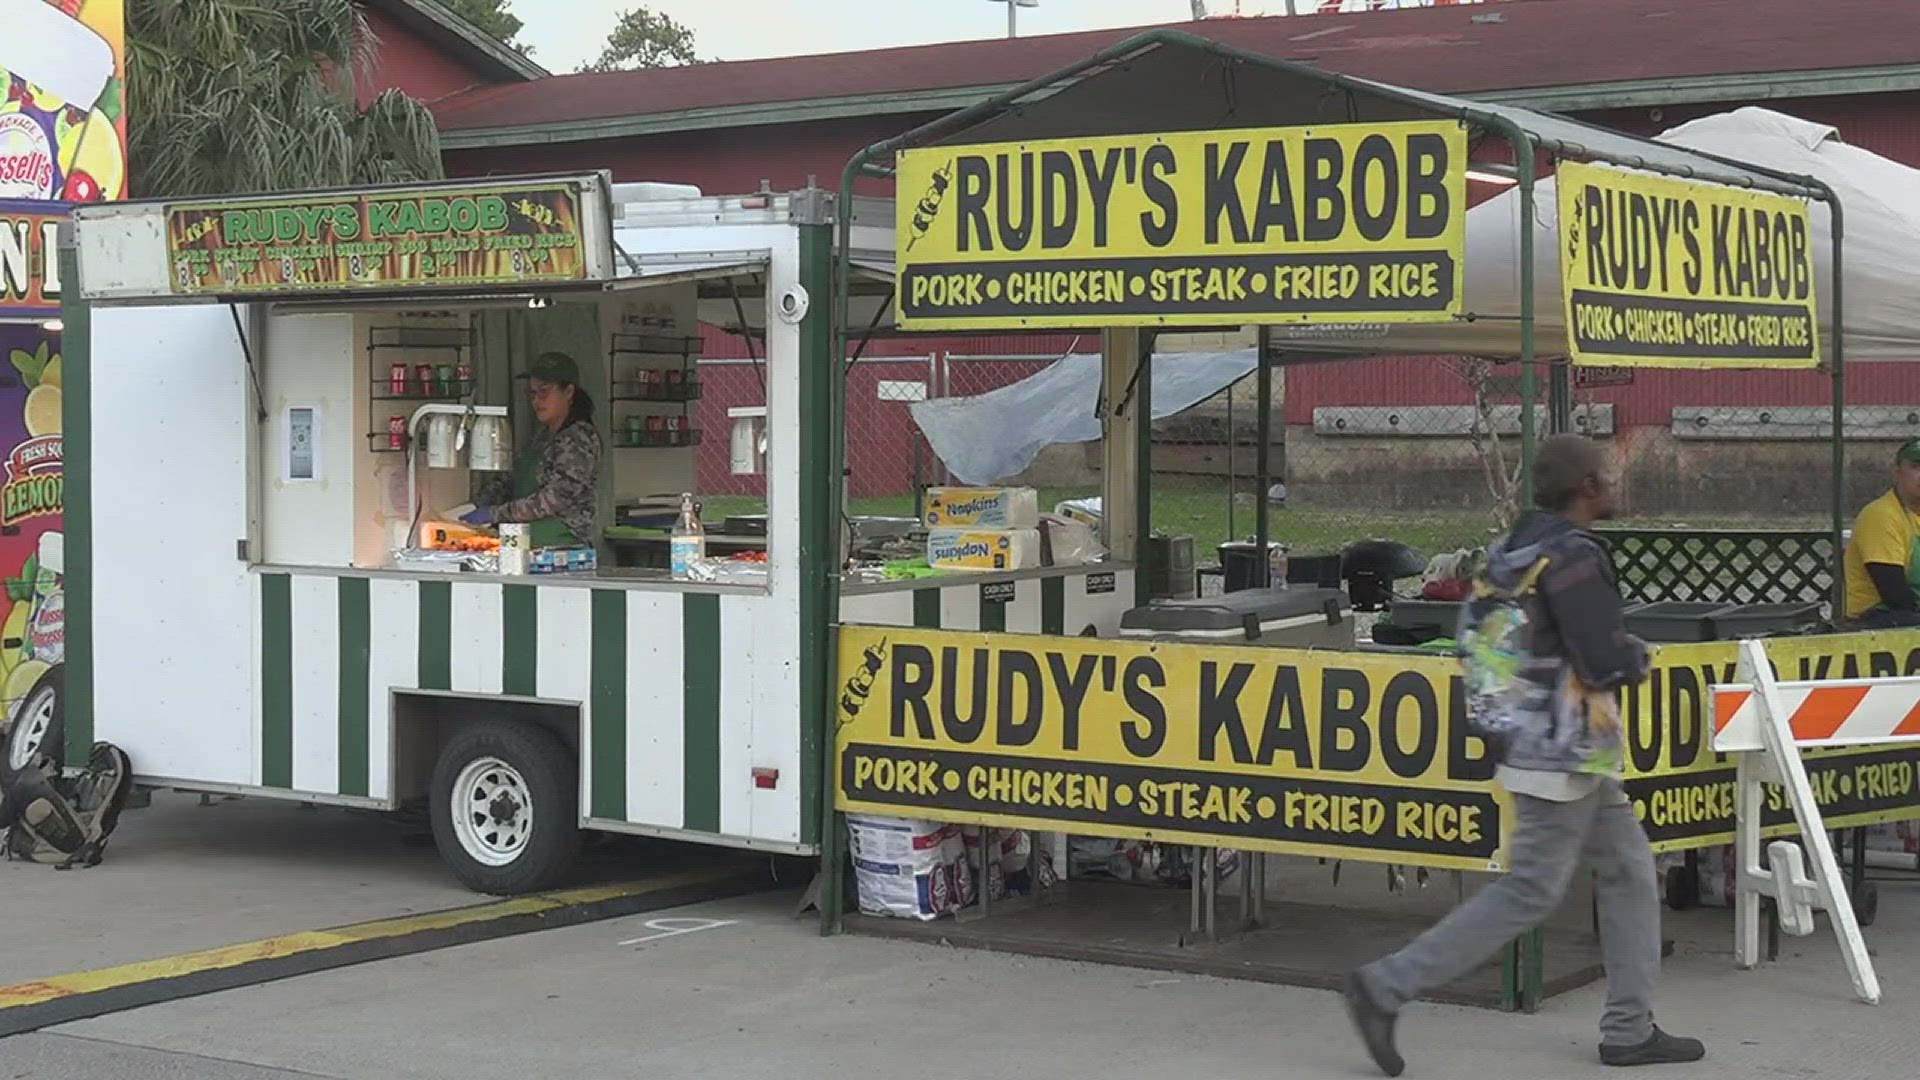 Vendors from all over Southeast Texas fired up their grills to serve up food like fried alligator, kabobs, funnel cake and even brisket ramen.